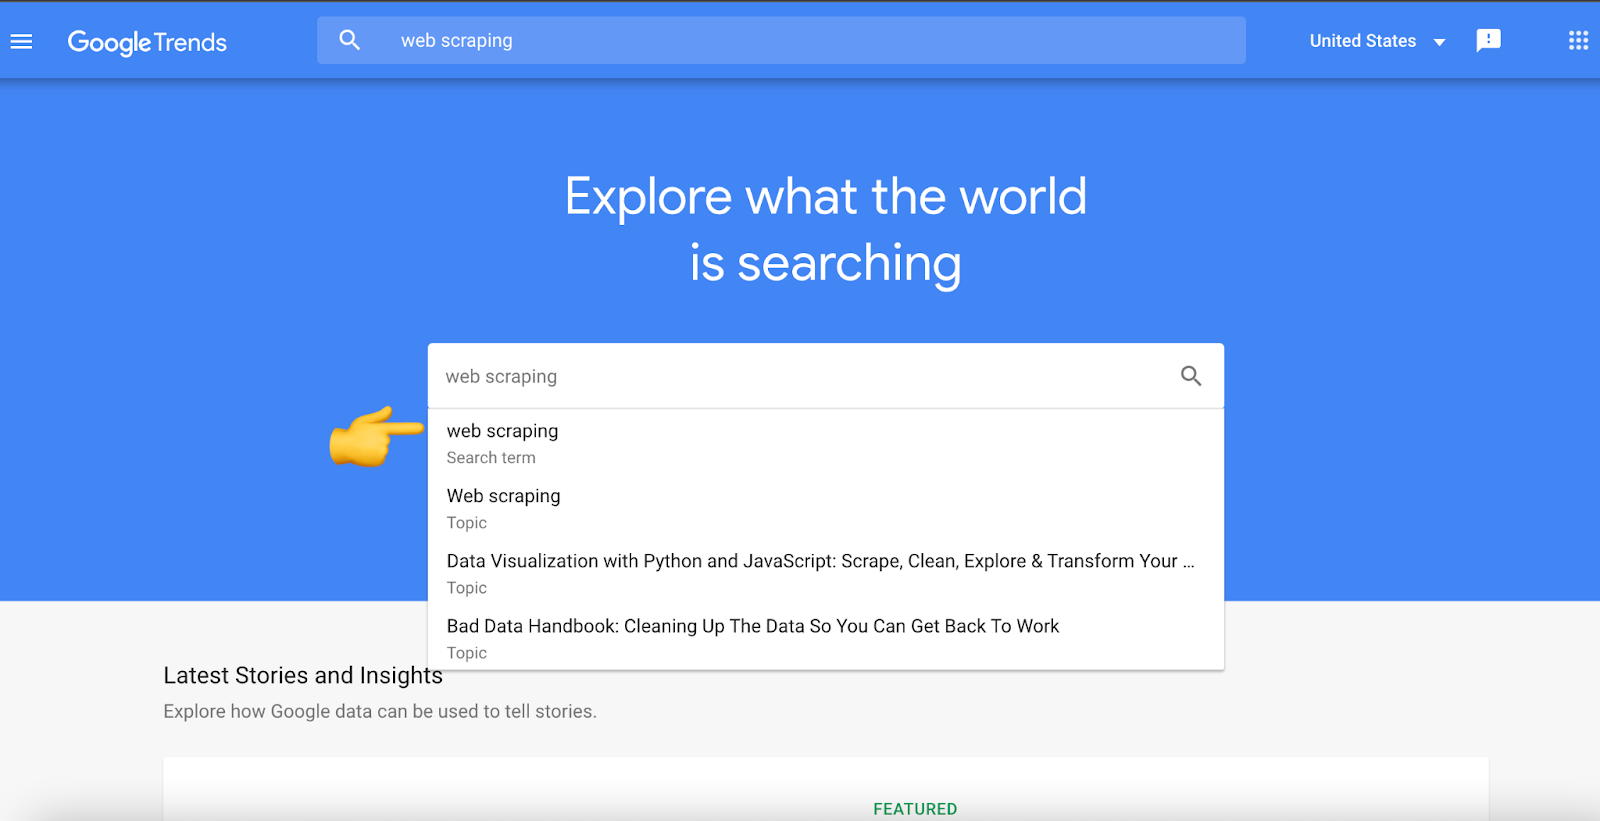 Google Trends offers two search options, called search term and topic, for a search term or topic. 